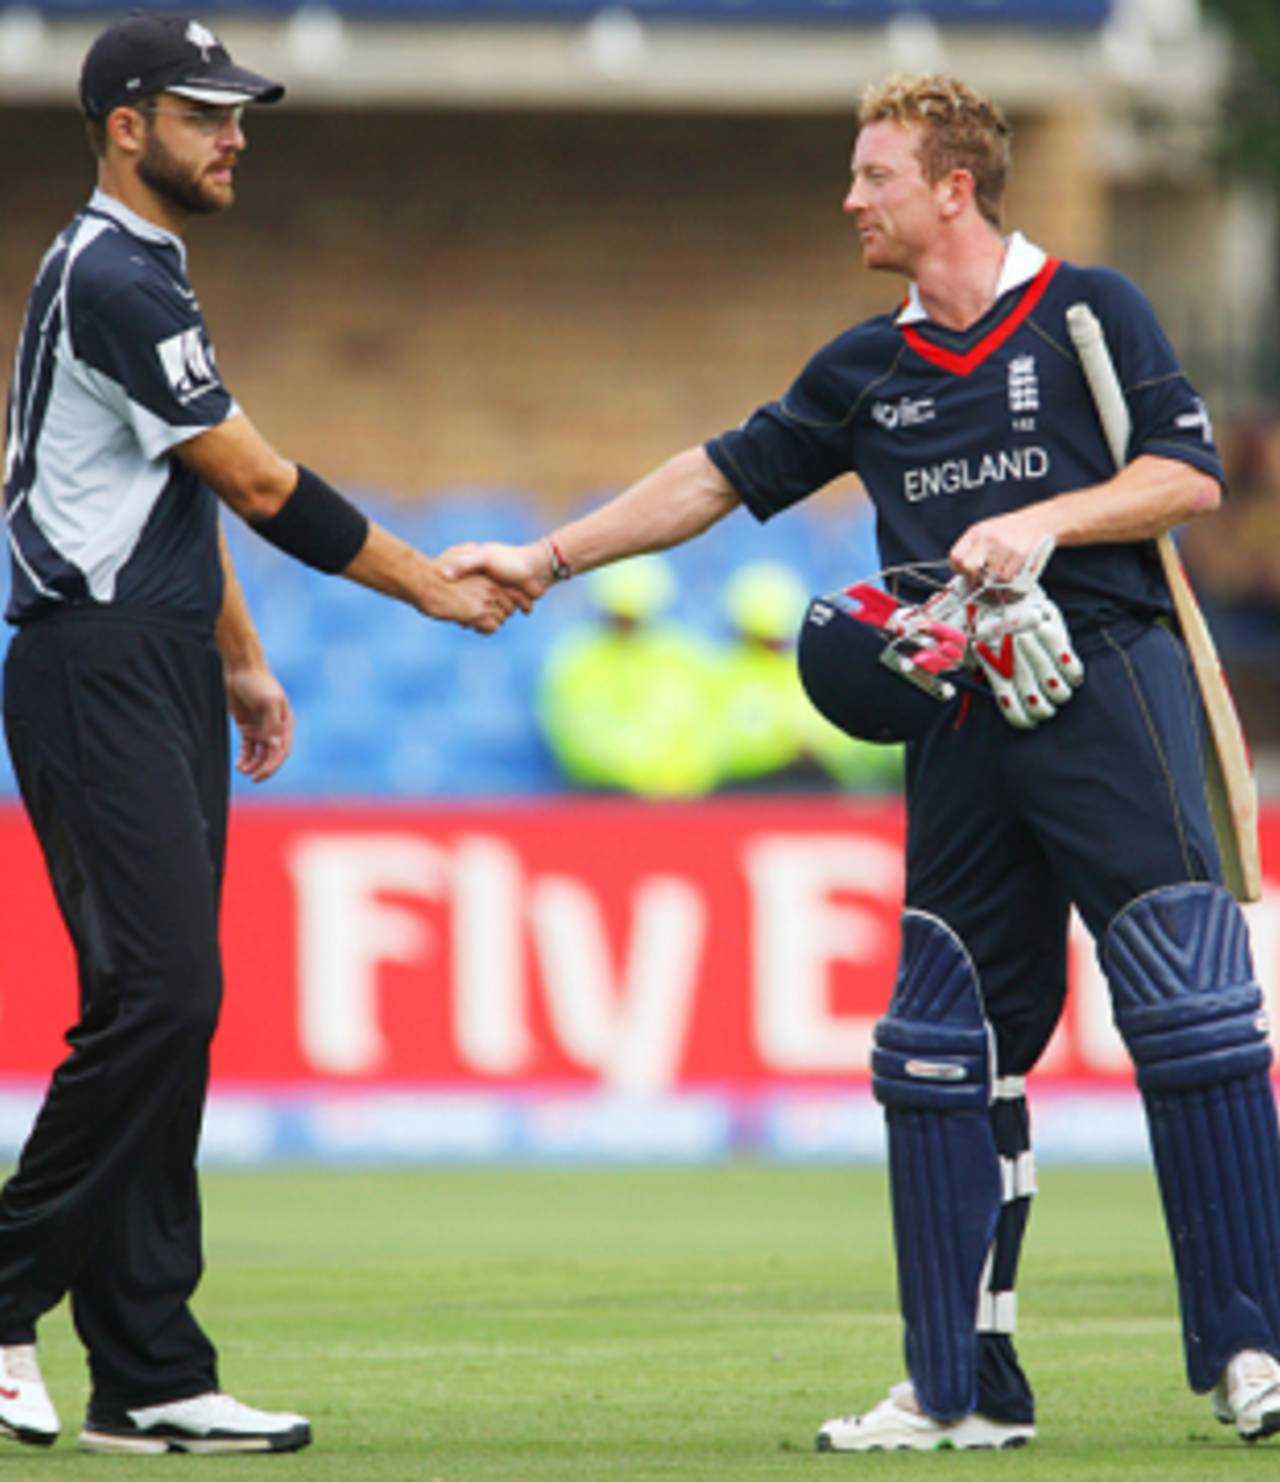 Paul Collingwood walked up to Daniel Vettori to thank him with a handshake&nbsp;&nbsp;&bull;&nbsp;&nbsp;Getty Images